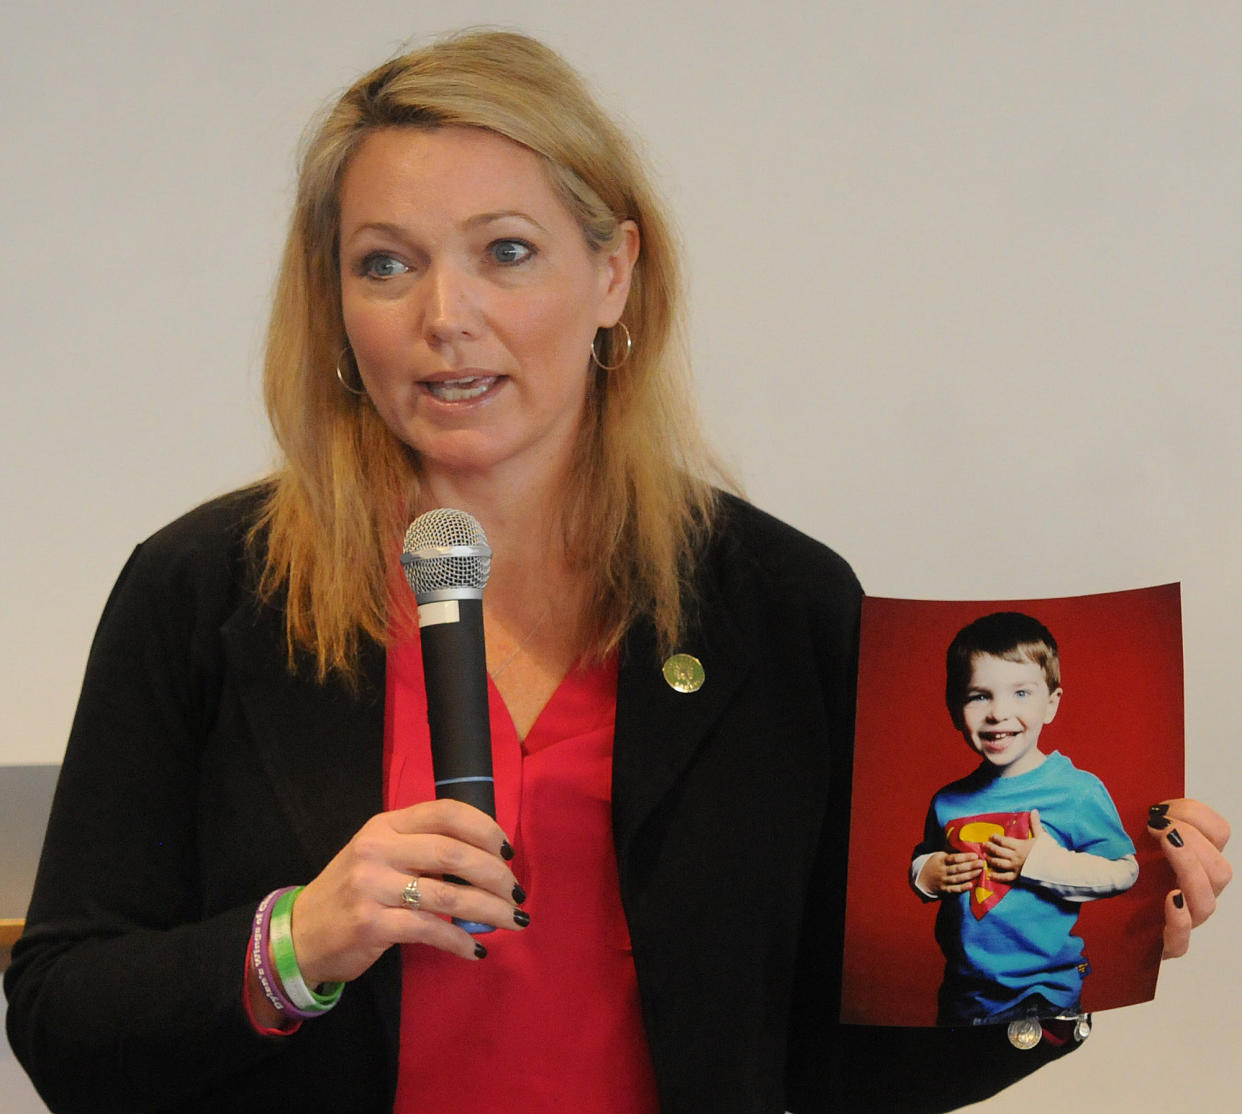 Nicole Hockley speaks into a microphone while holding a photo of her son Dylan, wearing a Superman T-shirt.